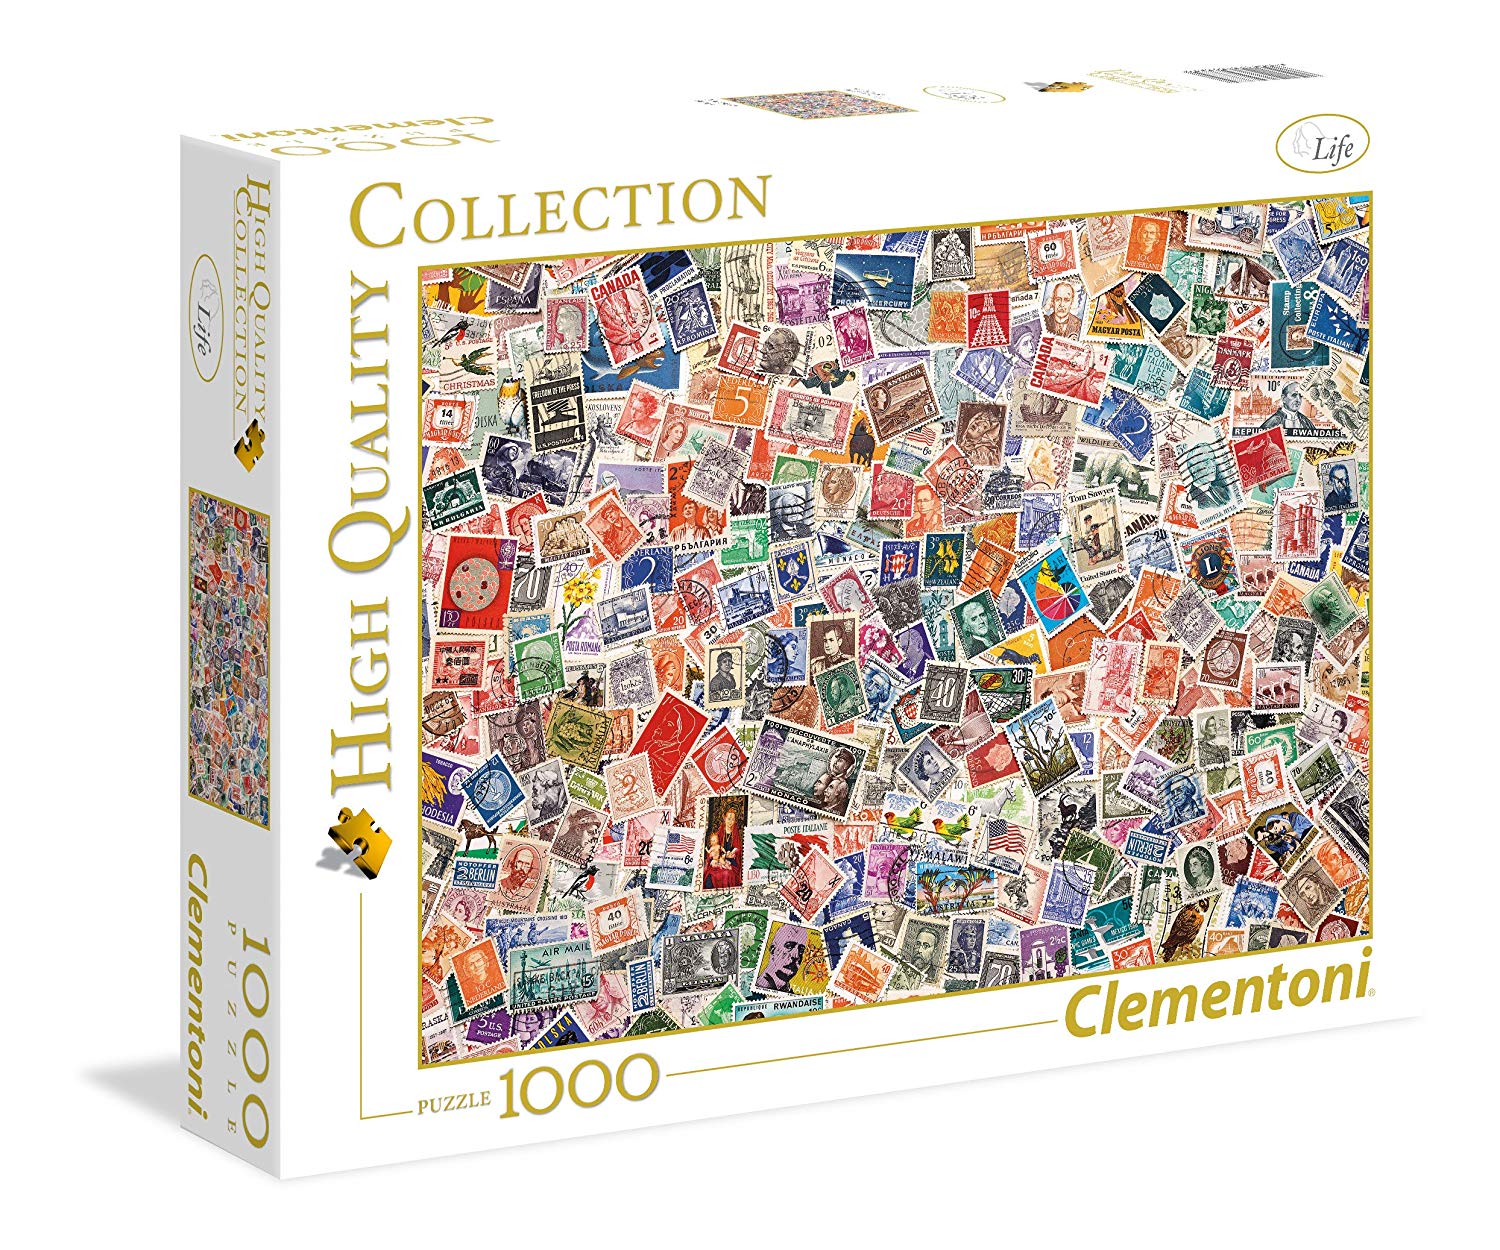 CLEMENTONI HIGH QUALITY COLLECTION JIGSAW PUZZLE STAMPS 1000 PCS #39387 